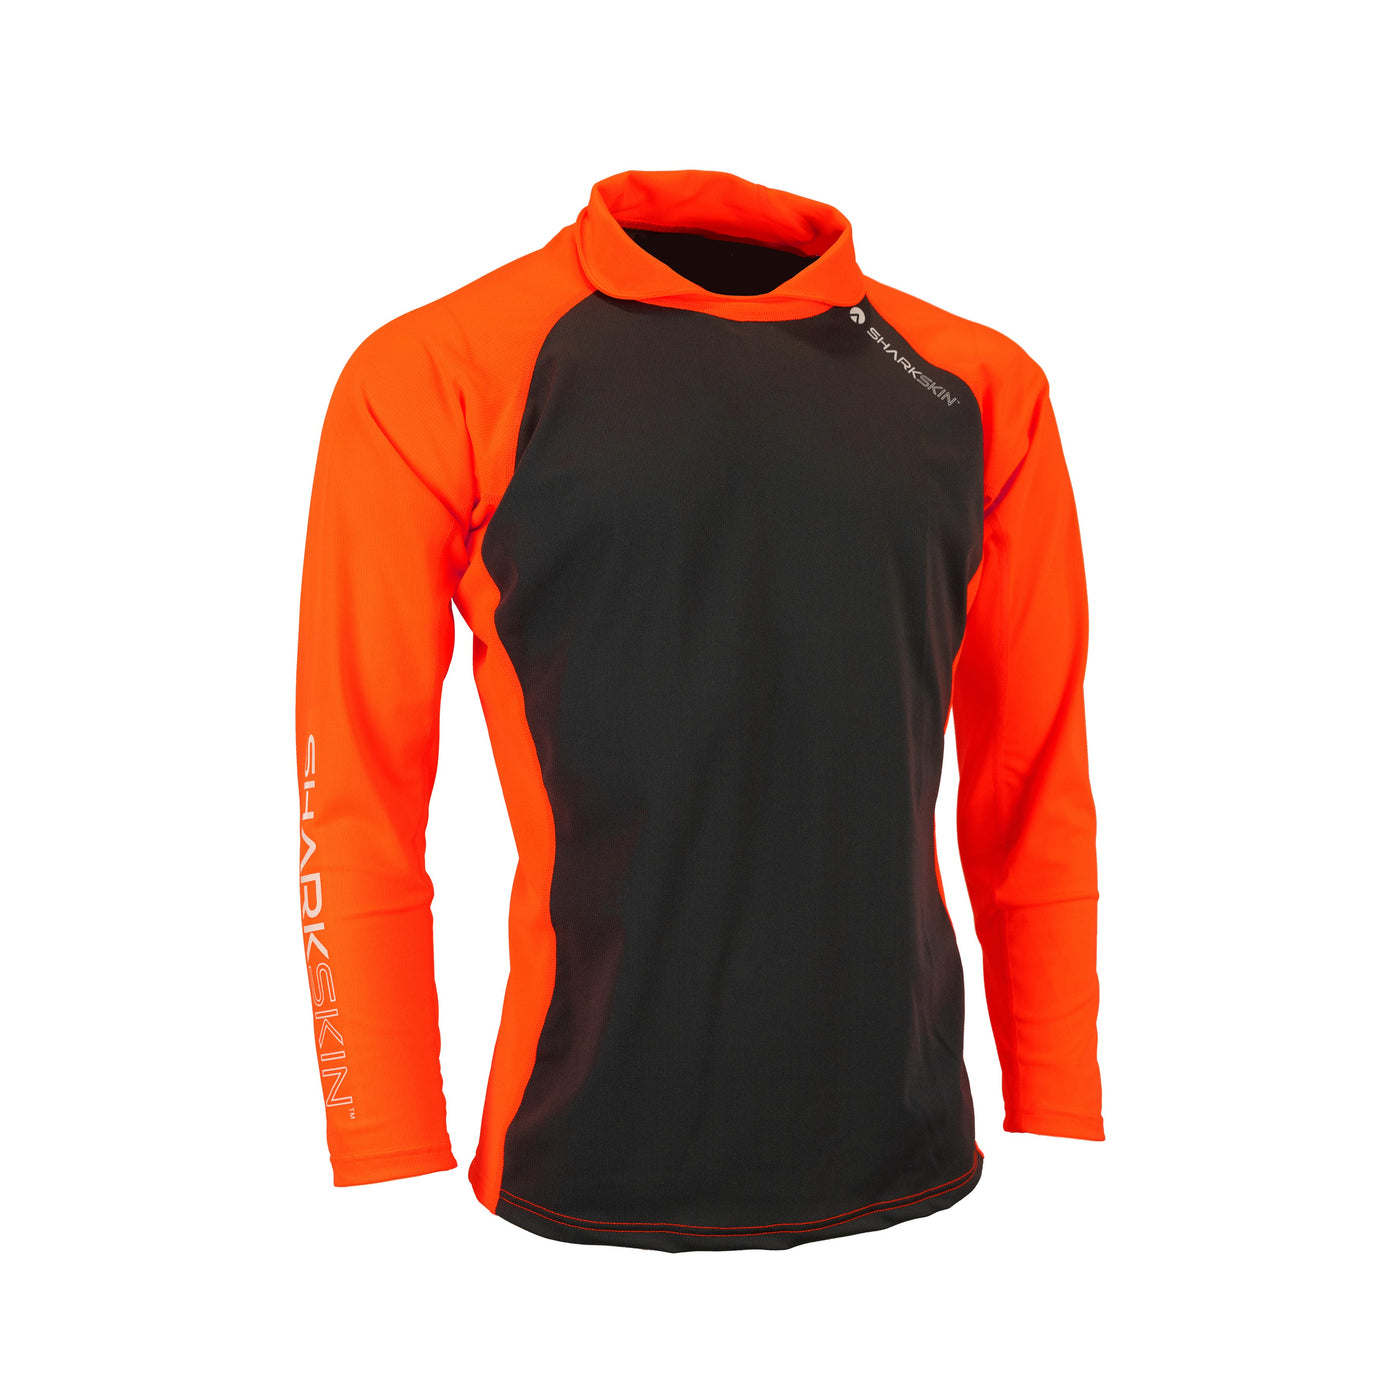 RAPID DRY RASHIE - LONG SLEEVE WITH COLLAR - UNISEX (SECONDS)